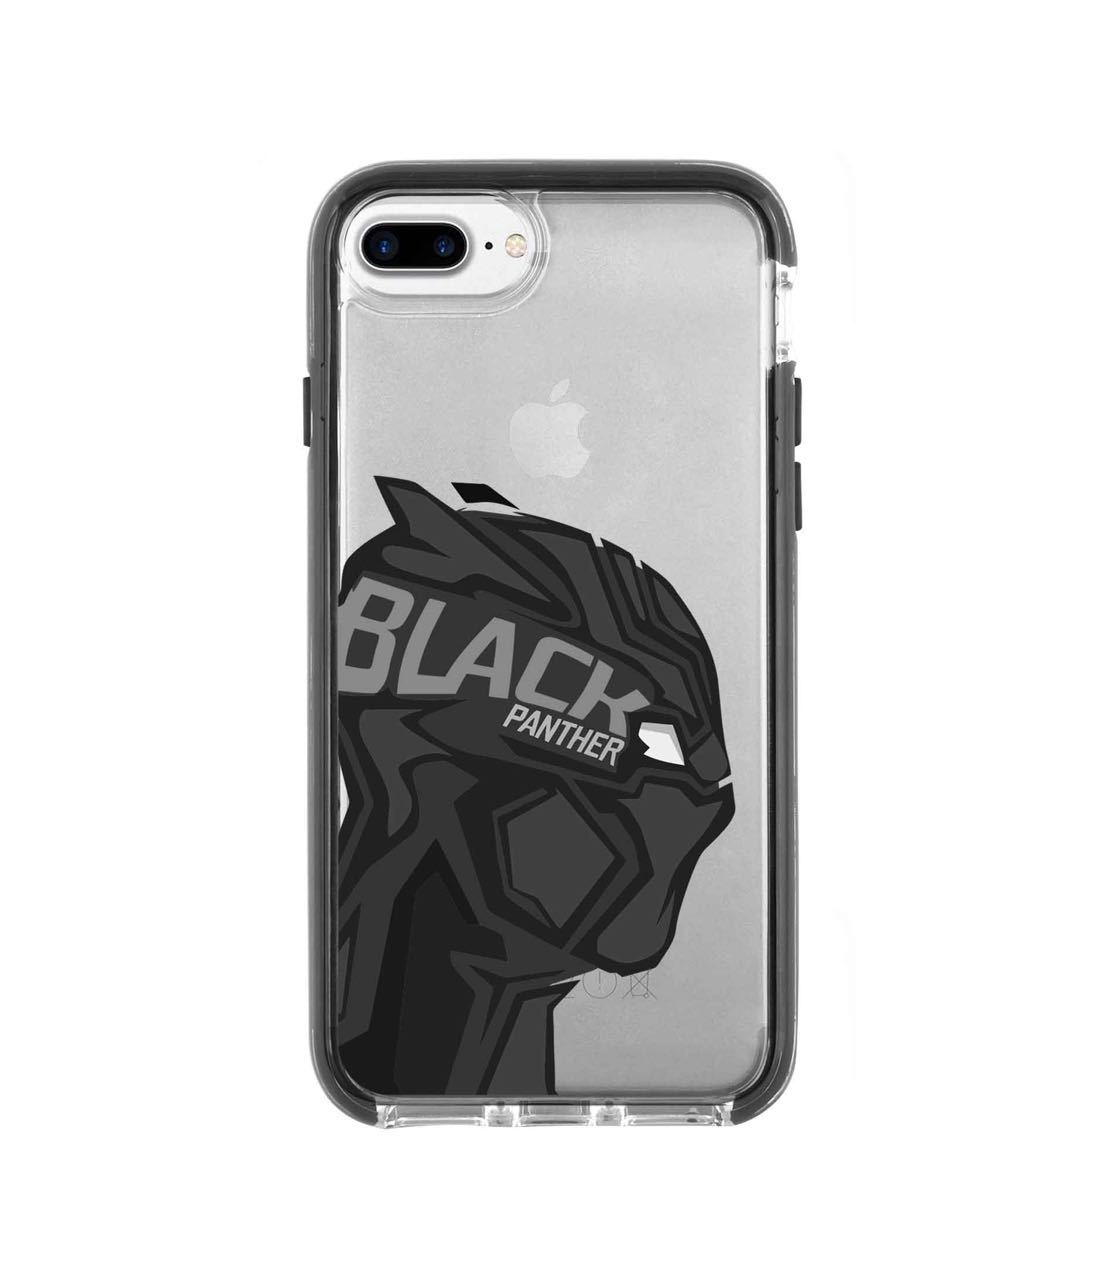 Black Panther Art - Extreme Phone Case for iPhone 7 Plus